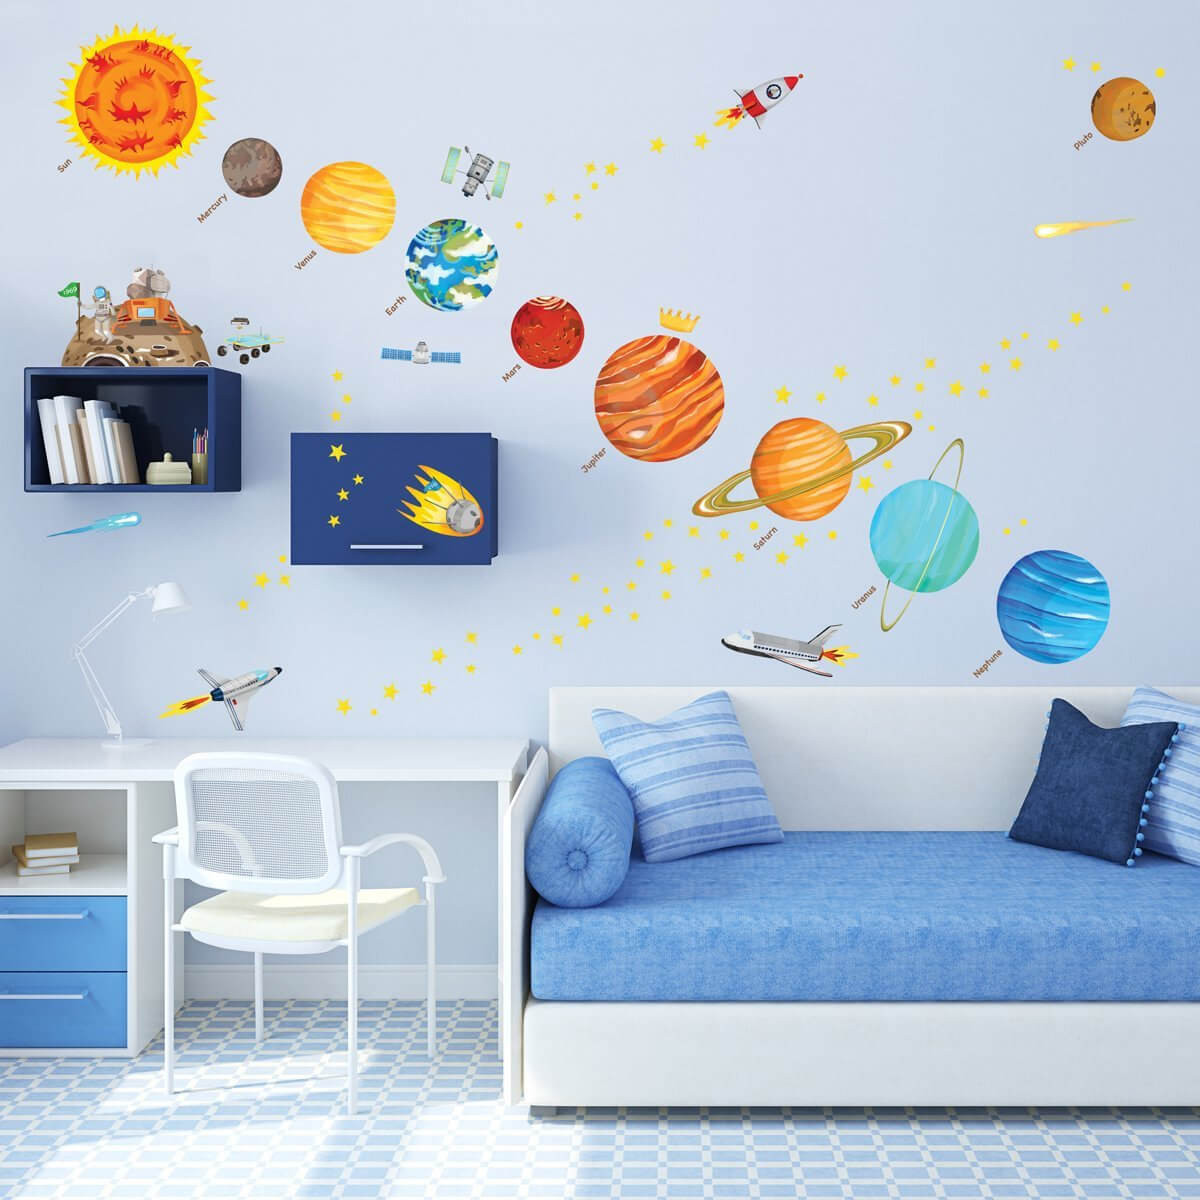 Solar System For Kids Room
 These Educational Wall Ideas are Perfect for Kids